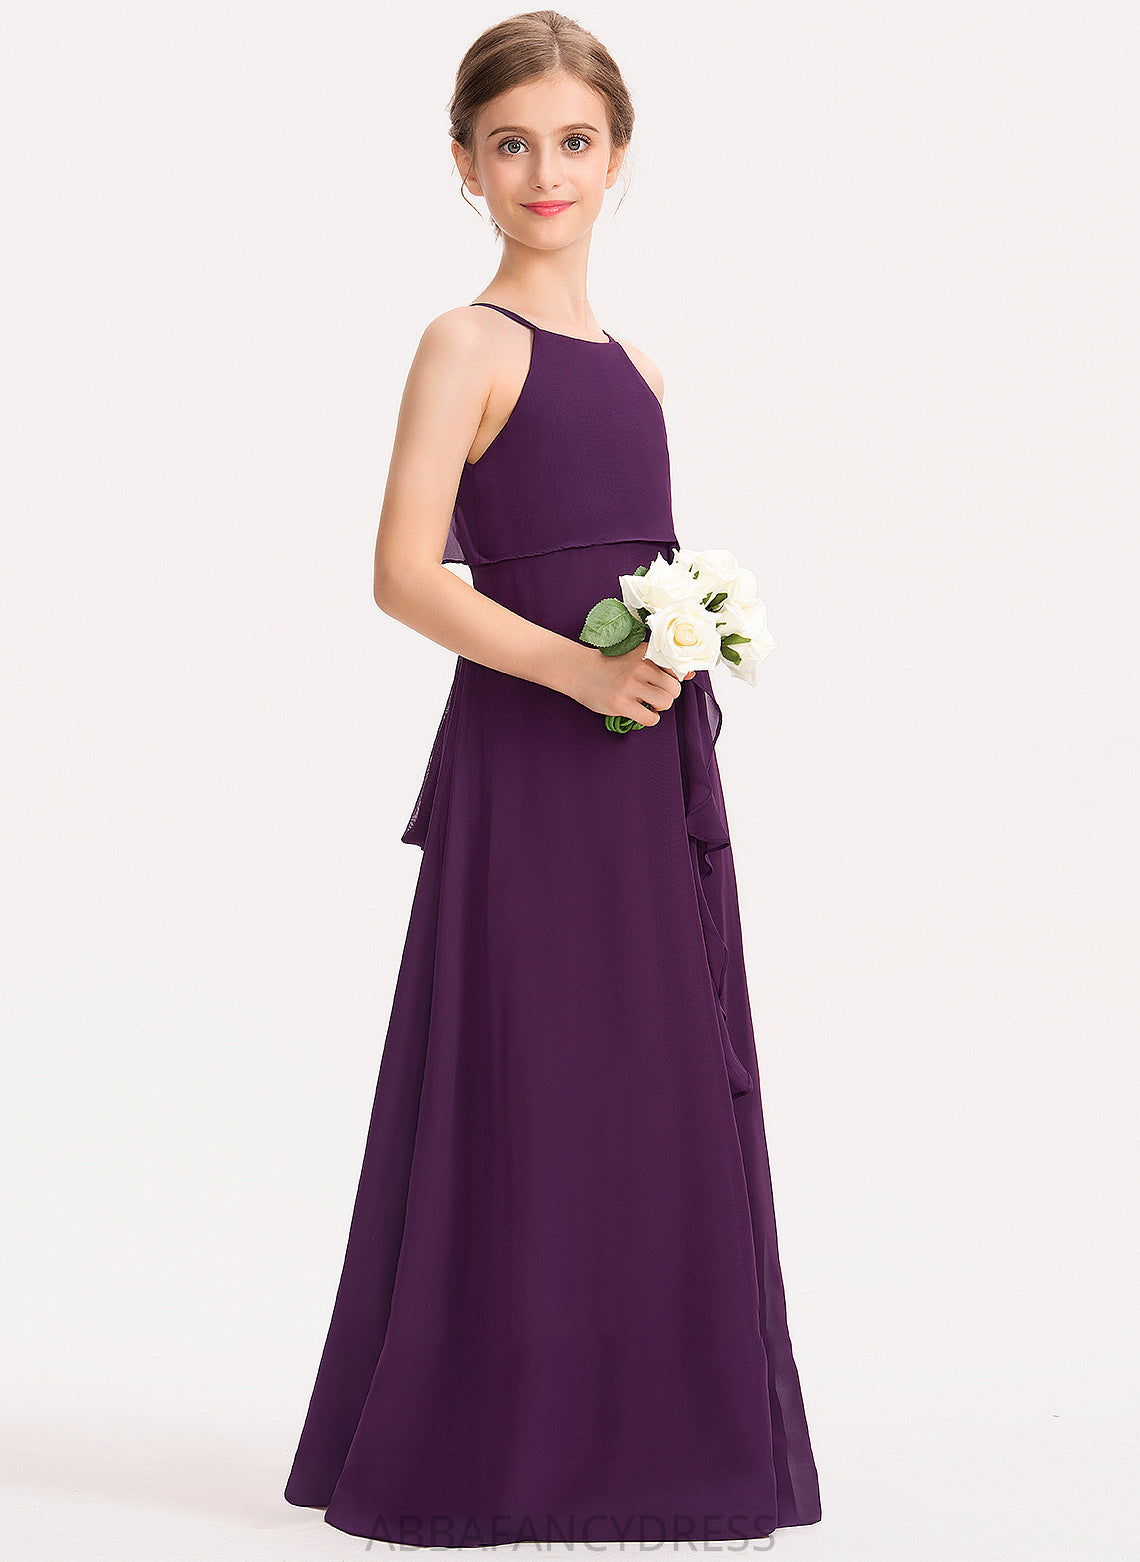 Ruffles A-Line Scoop Cascading Melany Junior Bridesmaid Dresses Bow(s) Chiffon Neck Floor-Length With